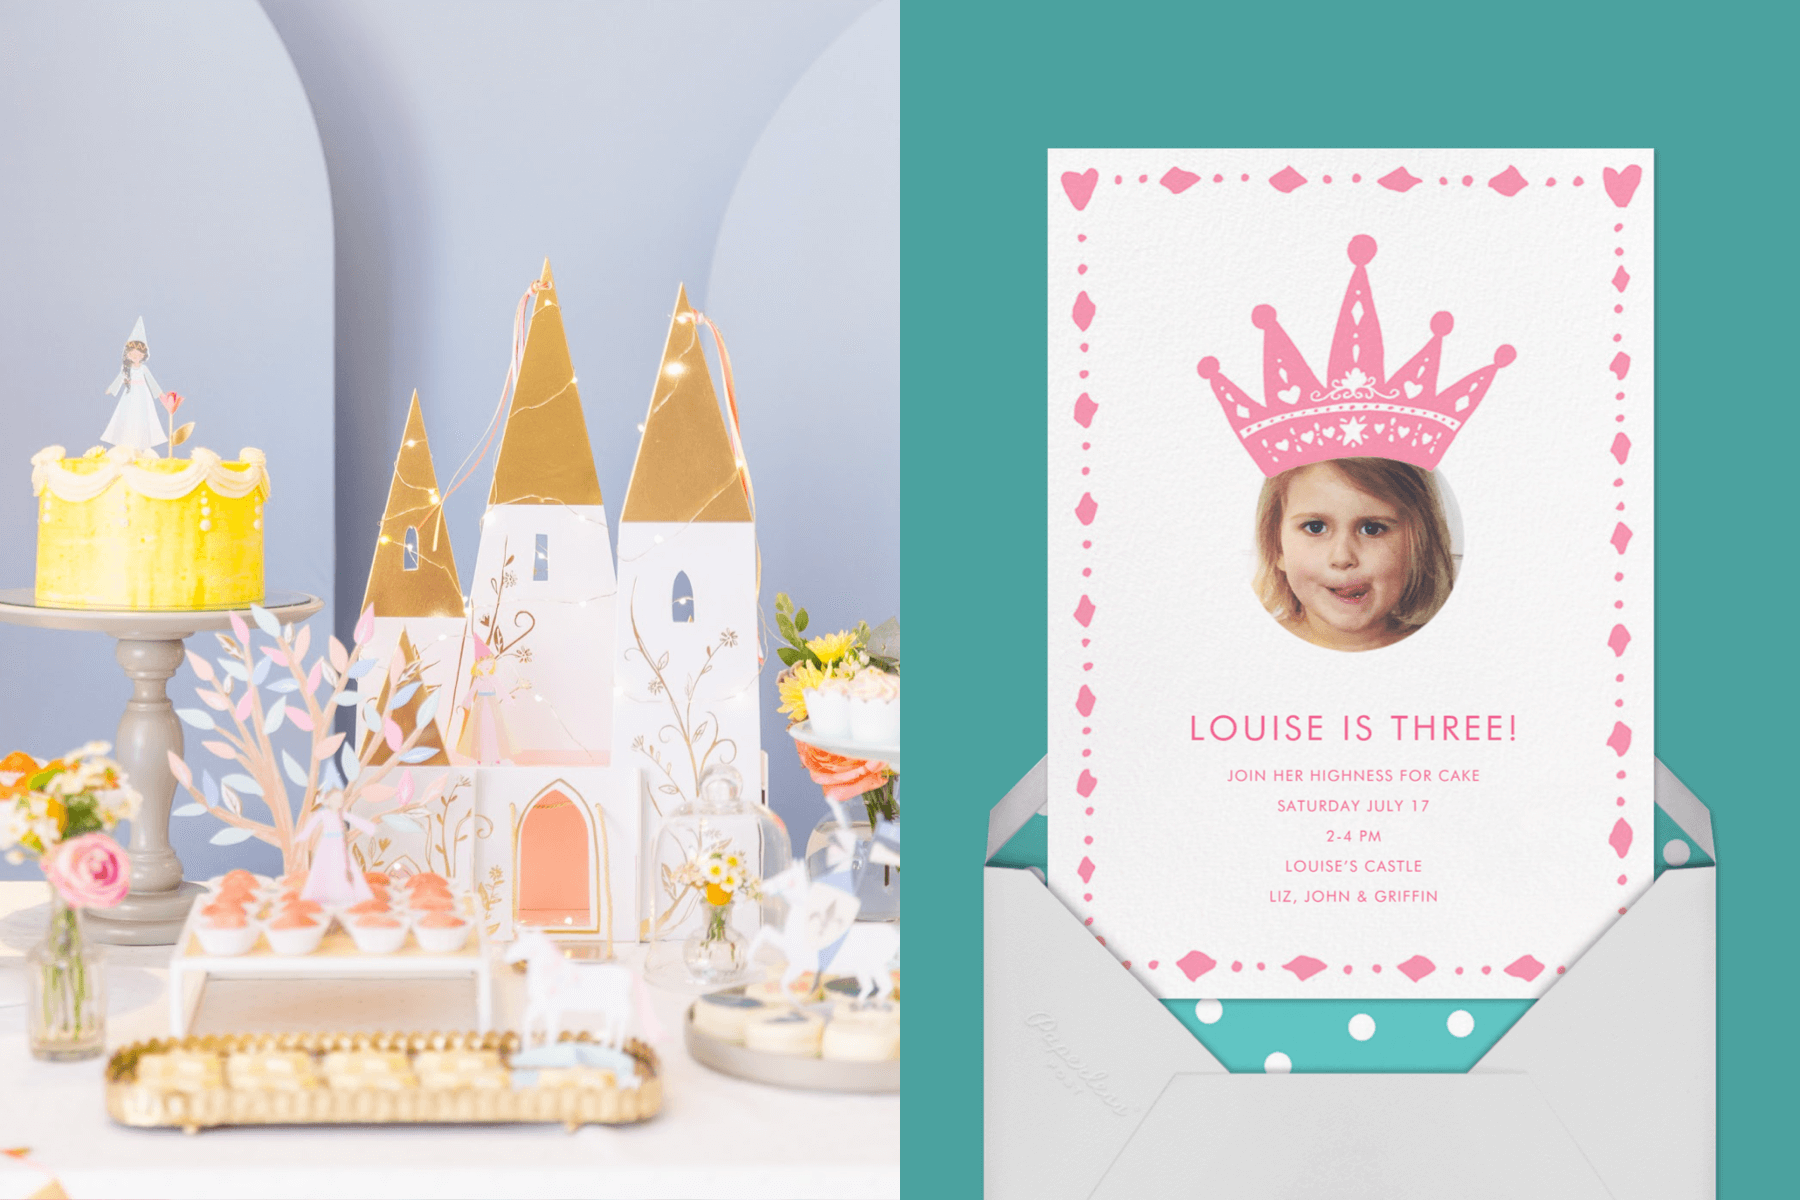 Left: A castle and princess-themed tablescape with twinkle lights and a yellow cake. Right: A birthday invitation with a photo of a young child’s face and an illustrated pink crown.